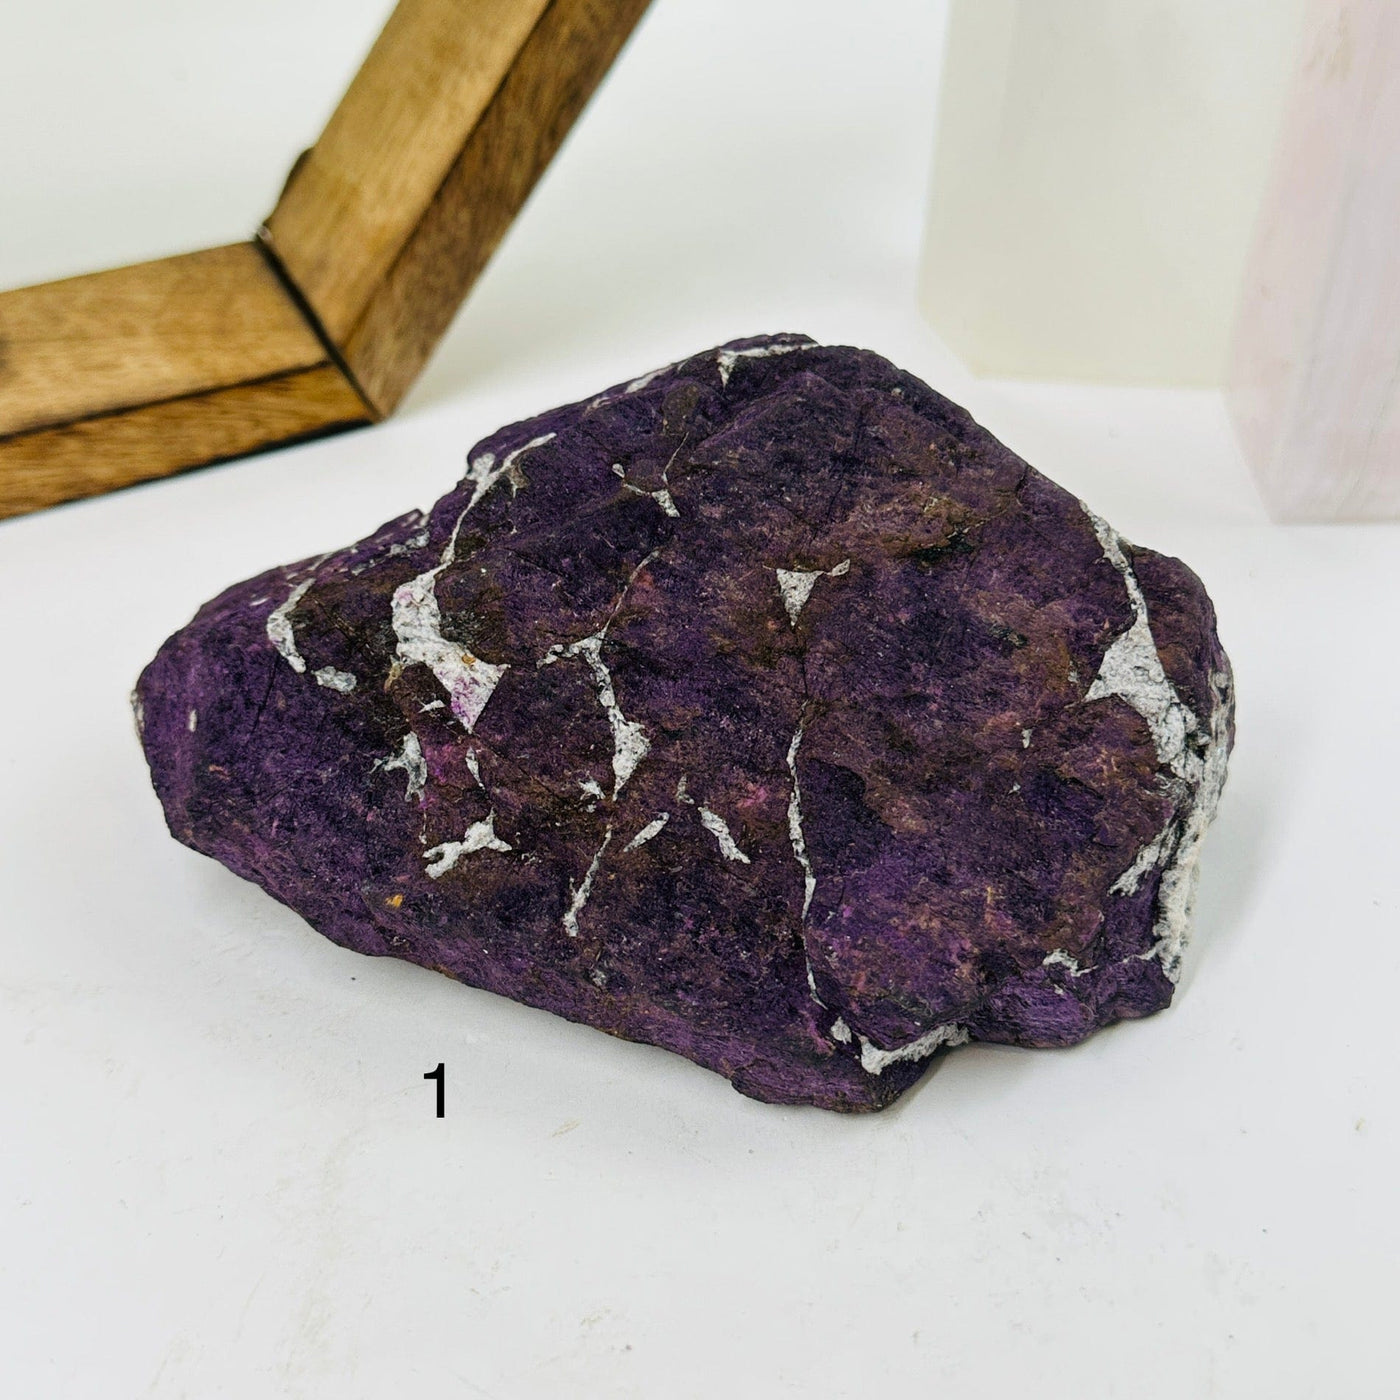 variant 1 of purpurite with decorations in the background